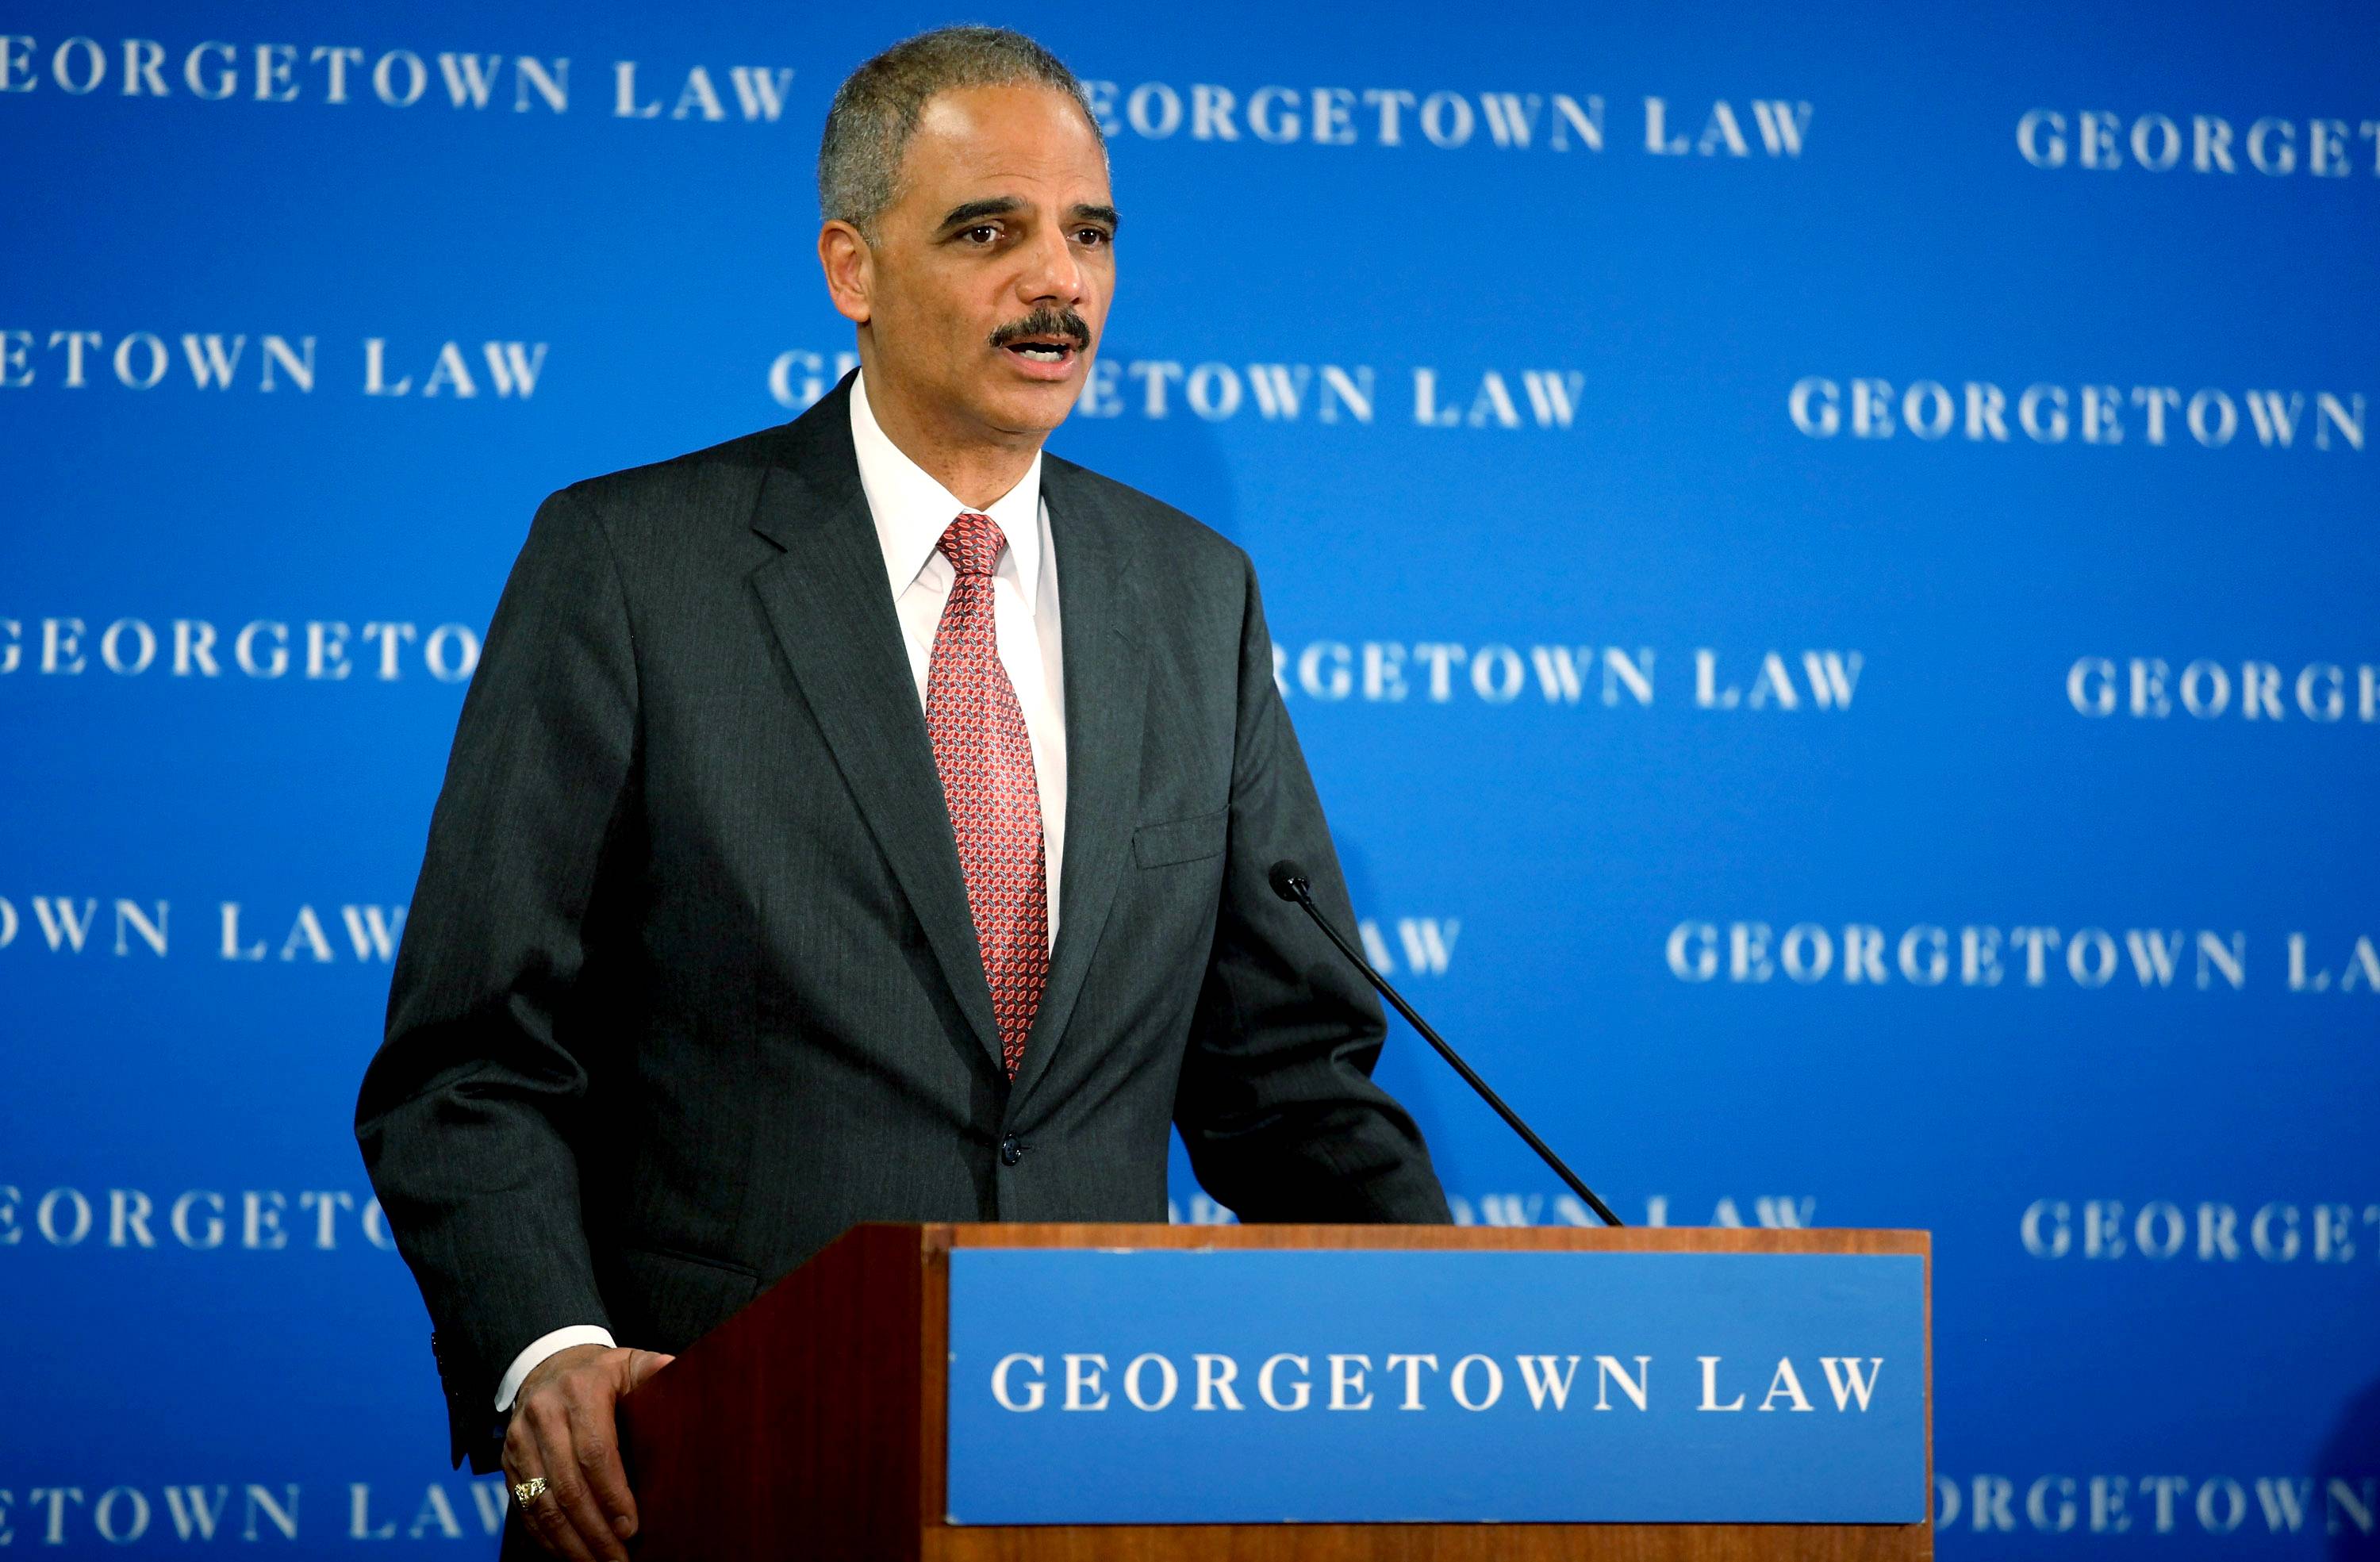 Eric Holder Says Voter ID Laws Are a Solution to a Problem That Doesn’t Exist - Last week Attorney General&nbsp;Eric Holder&nbsp;harshly criticized the wave of voter identification laws sweeping the country and defended the&nbsp;Justice Department’s role in blocking those laws from taking effect in some states. The department also recently&nbsp;rejected Texas’s voter identification law, saying it would disenfranchise a large number of Hispanic voters.(Photo: Chip Somodevilla/Getty Images)